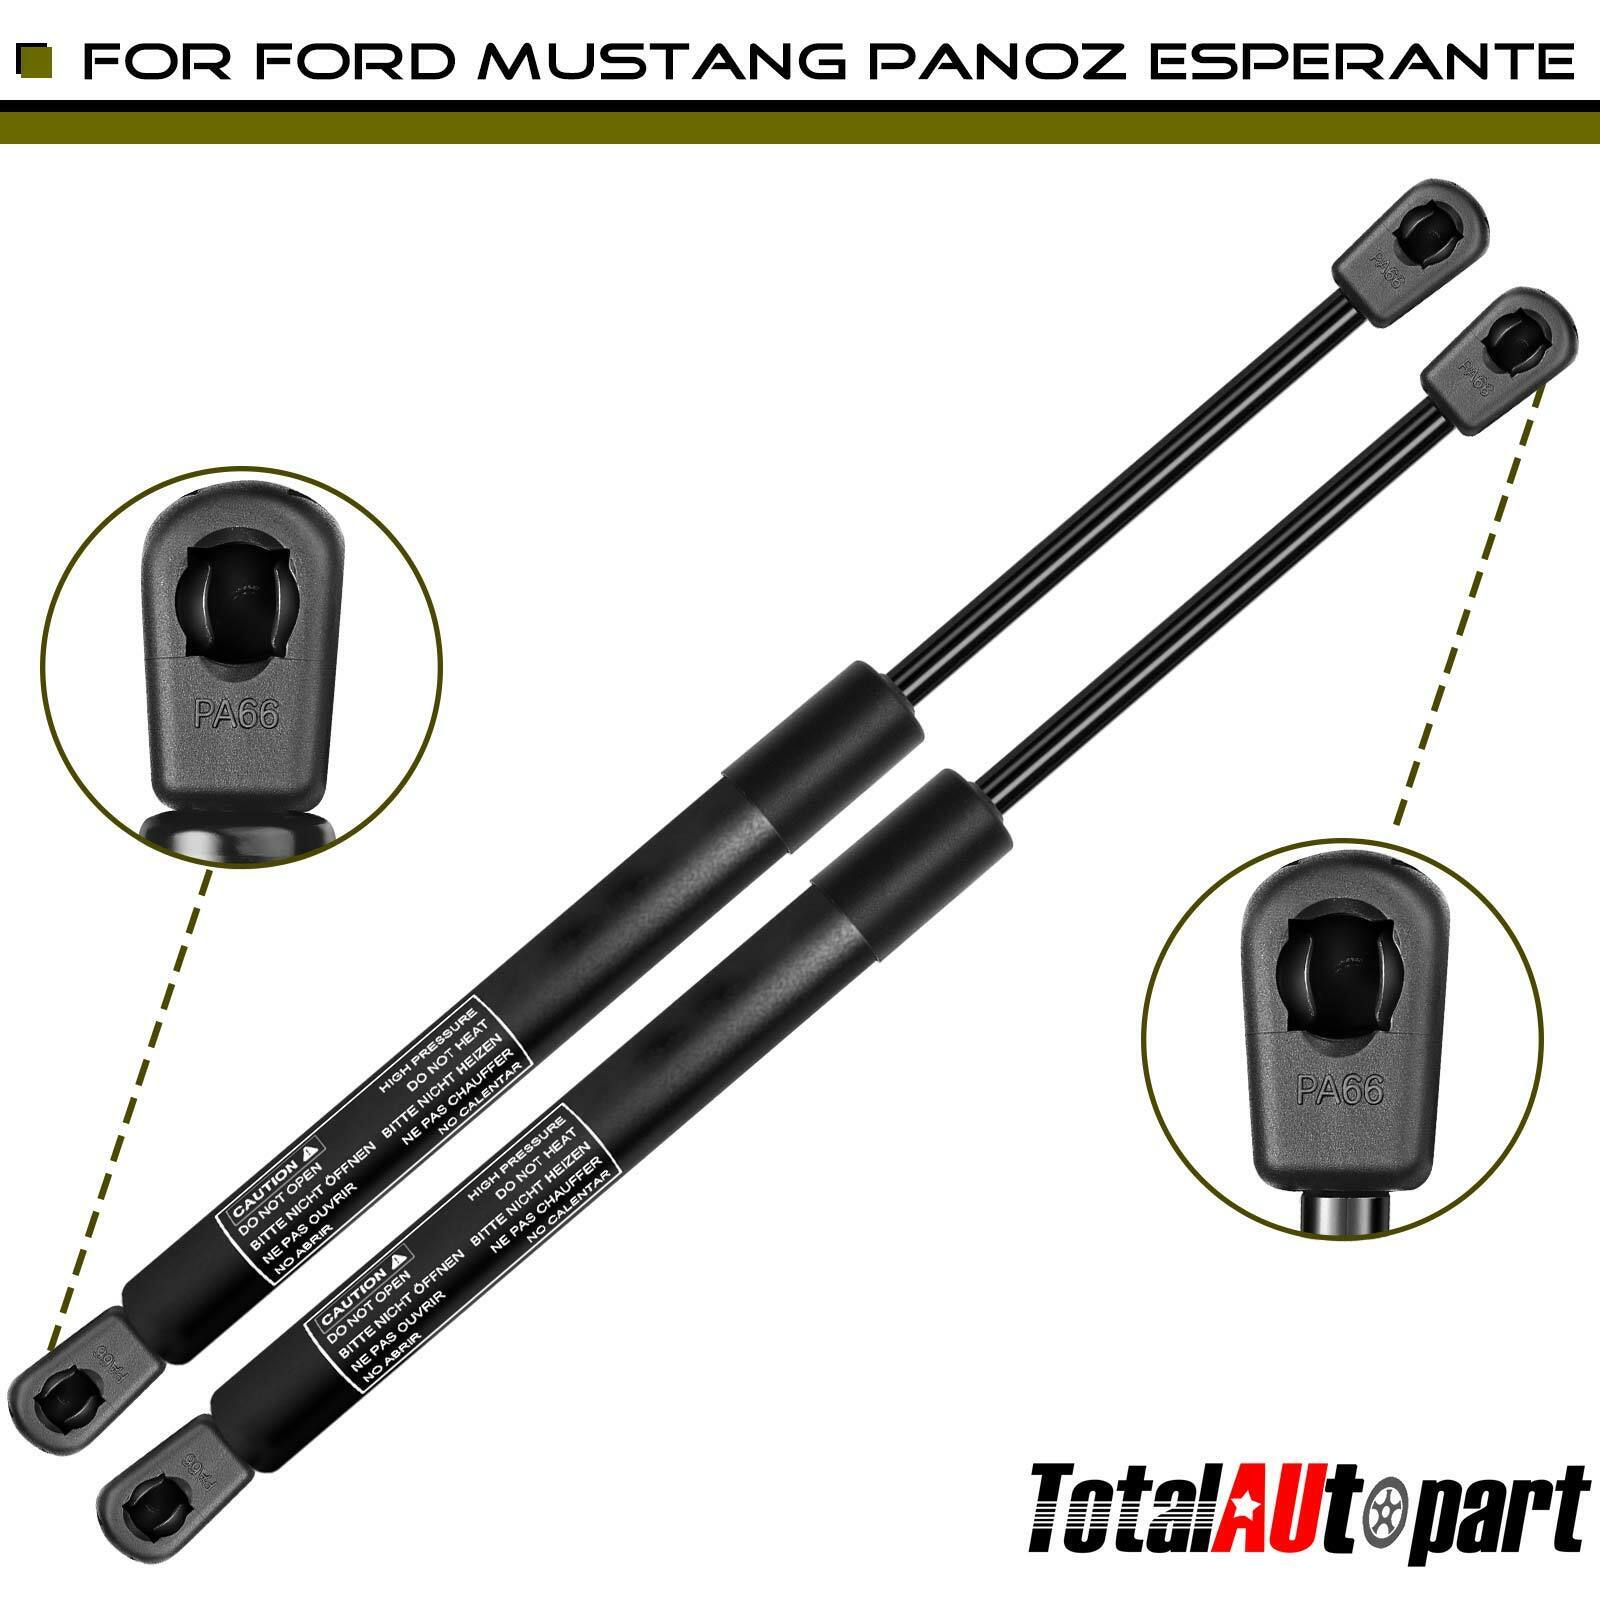 2x Tailgate Lift Supports Shock Struts Springs for Ford Mustang Esperante 4643